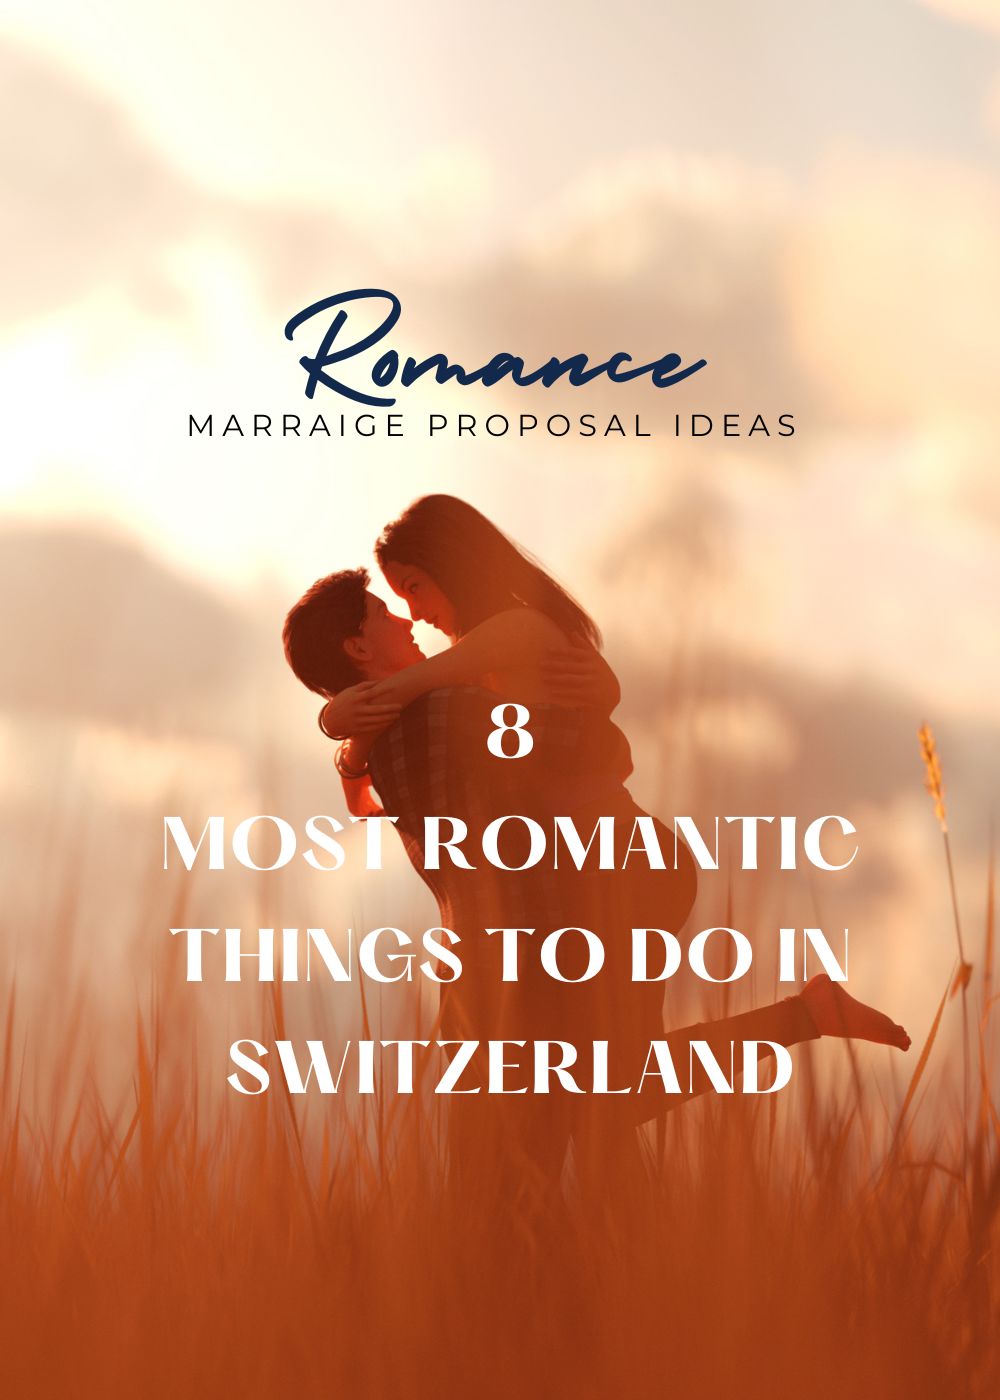 Most romantic things to do in Switzerland Wedding proposal ideas